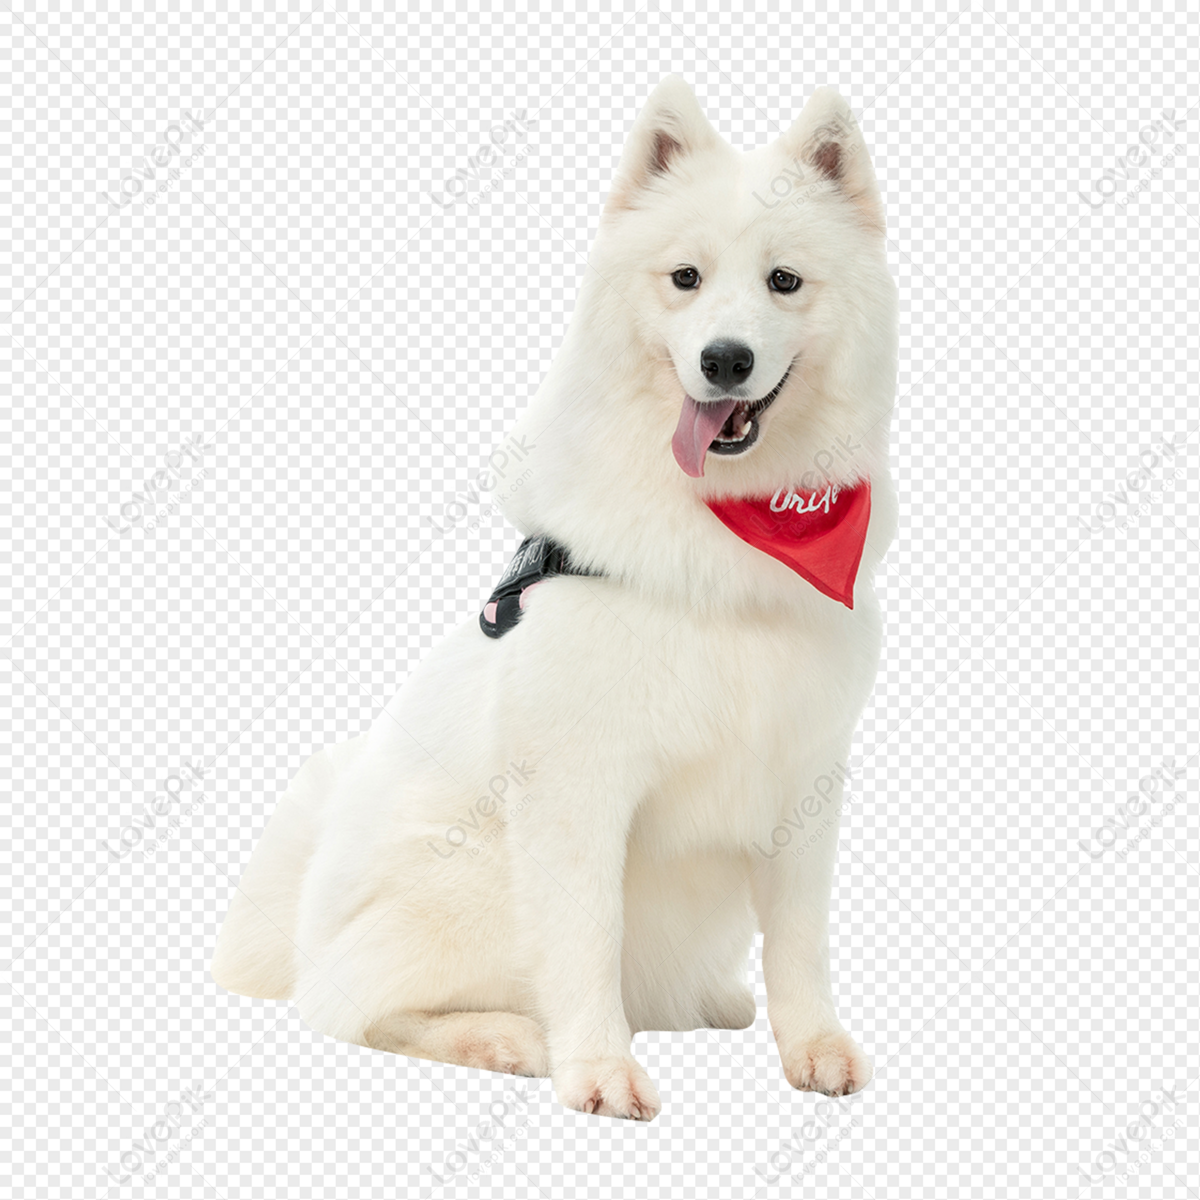 Cute Samoyed Pet Dog PNG Transparent Background And Clipart Image ...